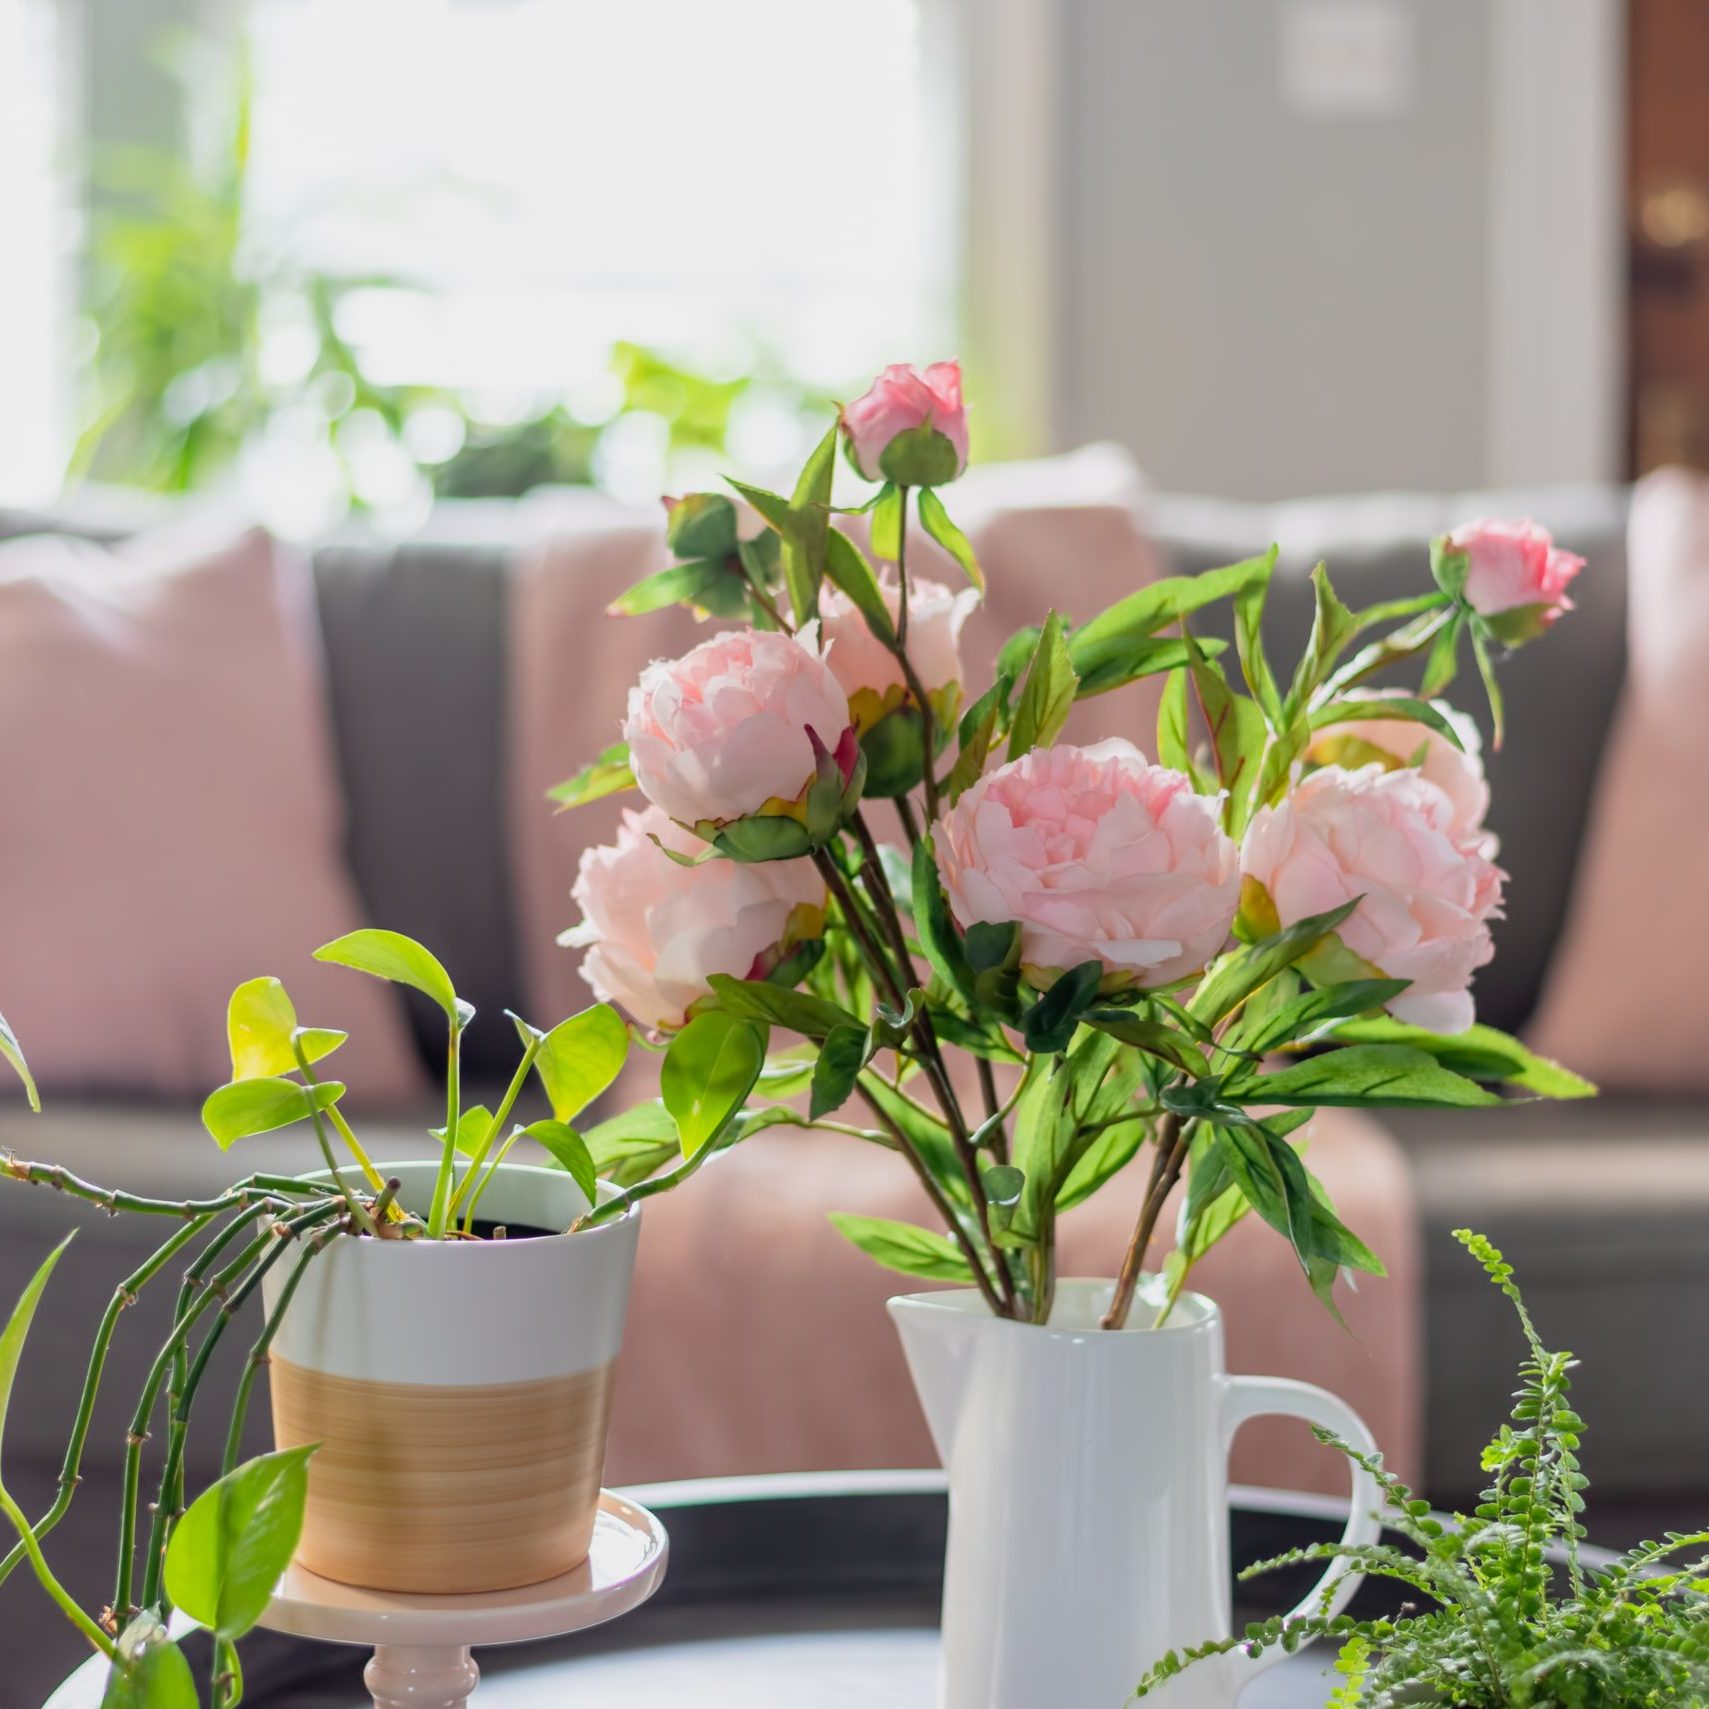 Pink peonies and potted plants brighten up the living room for Spring